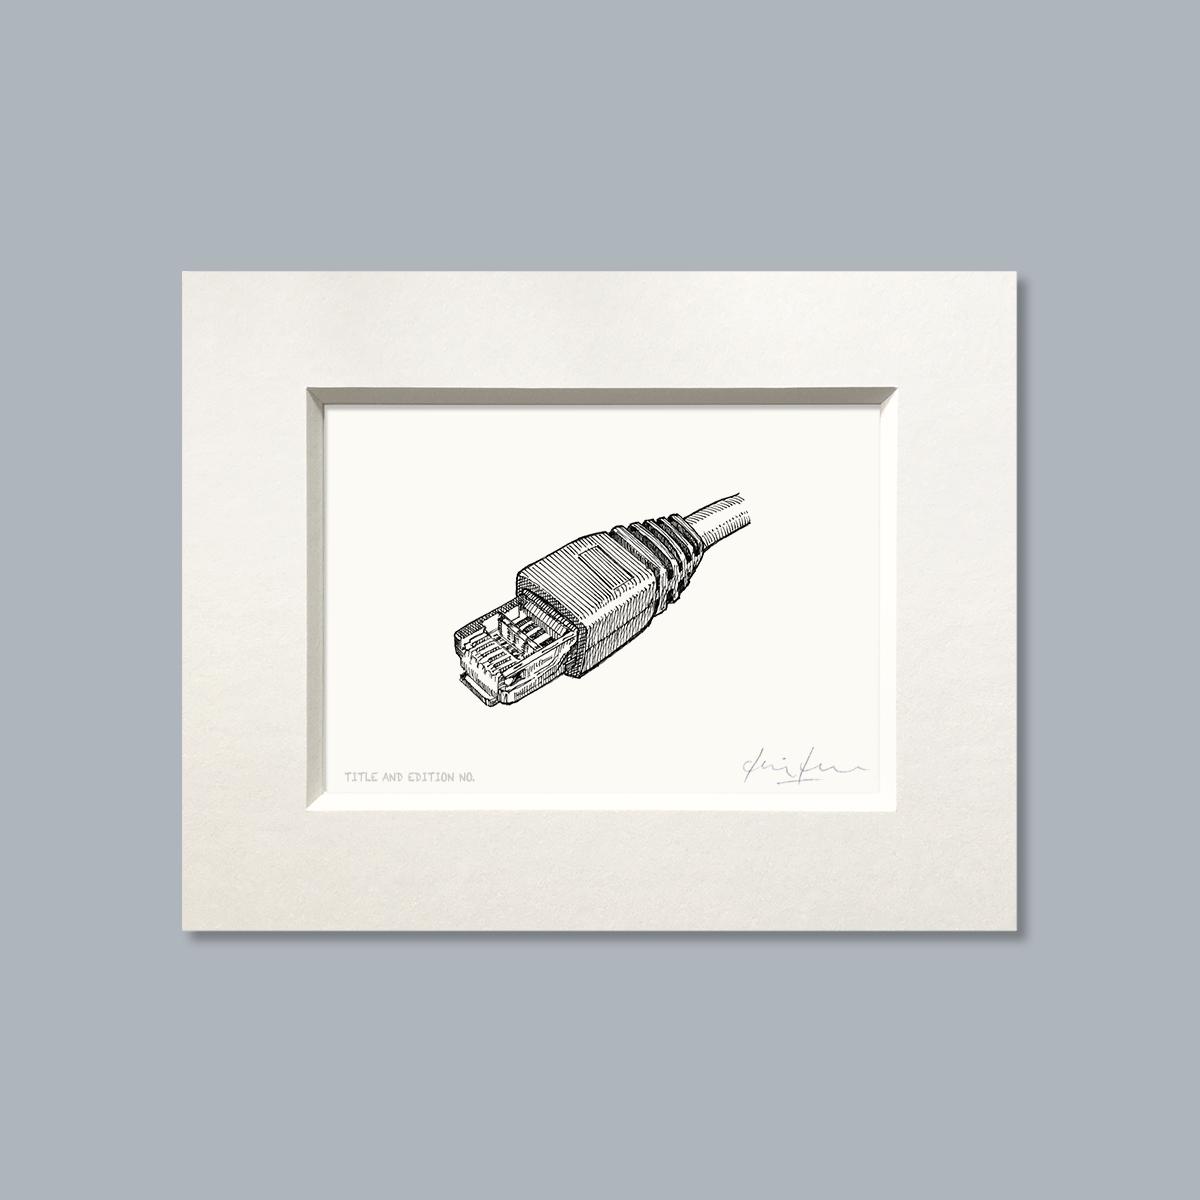 Limited edition print from pen and ink drawing of an ethernet connector in a white mount